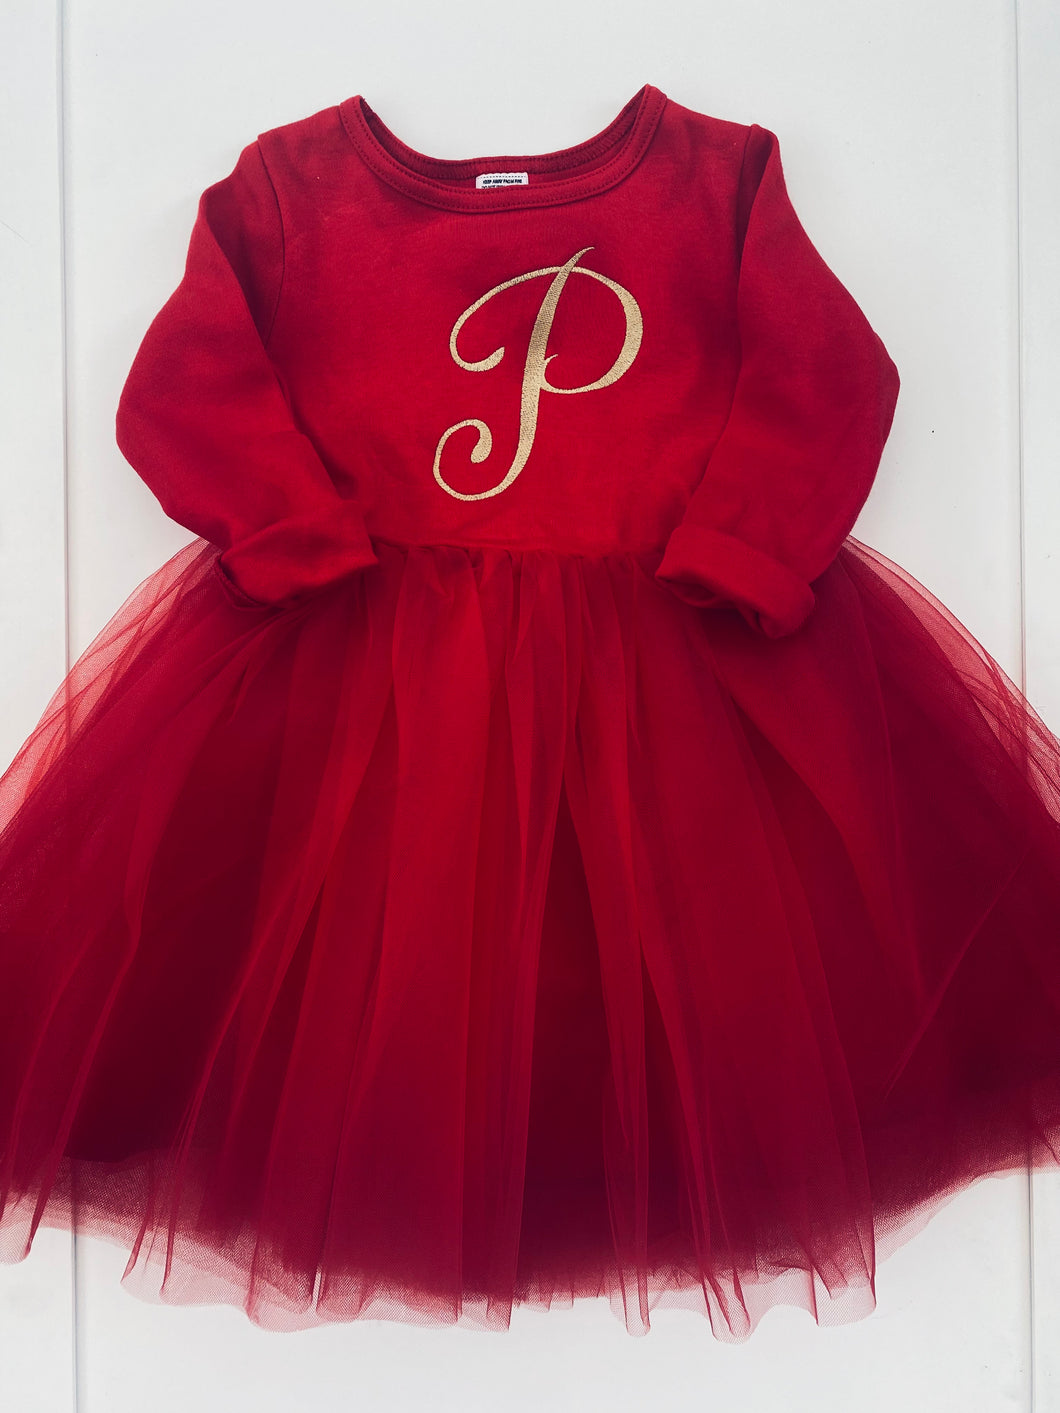 Embroidered Initial Christmas Dress (6M-9Years)